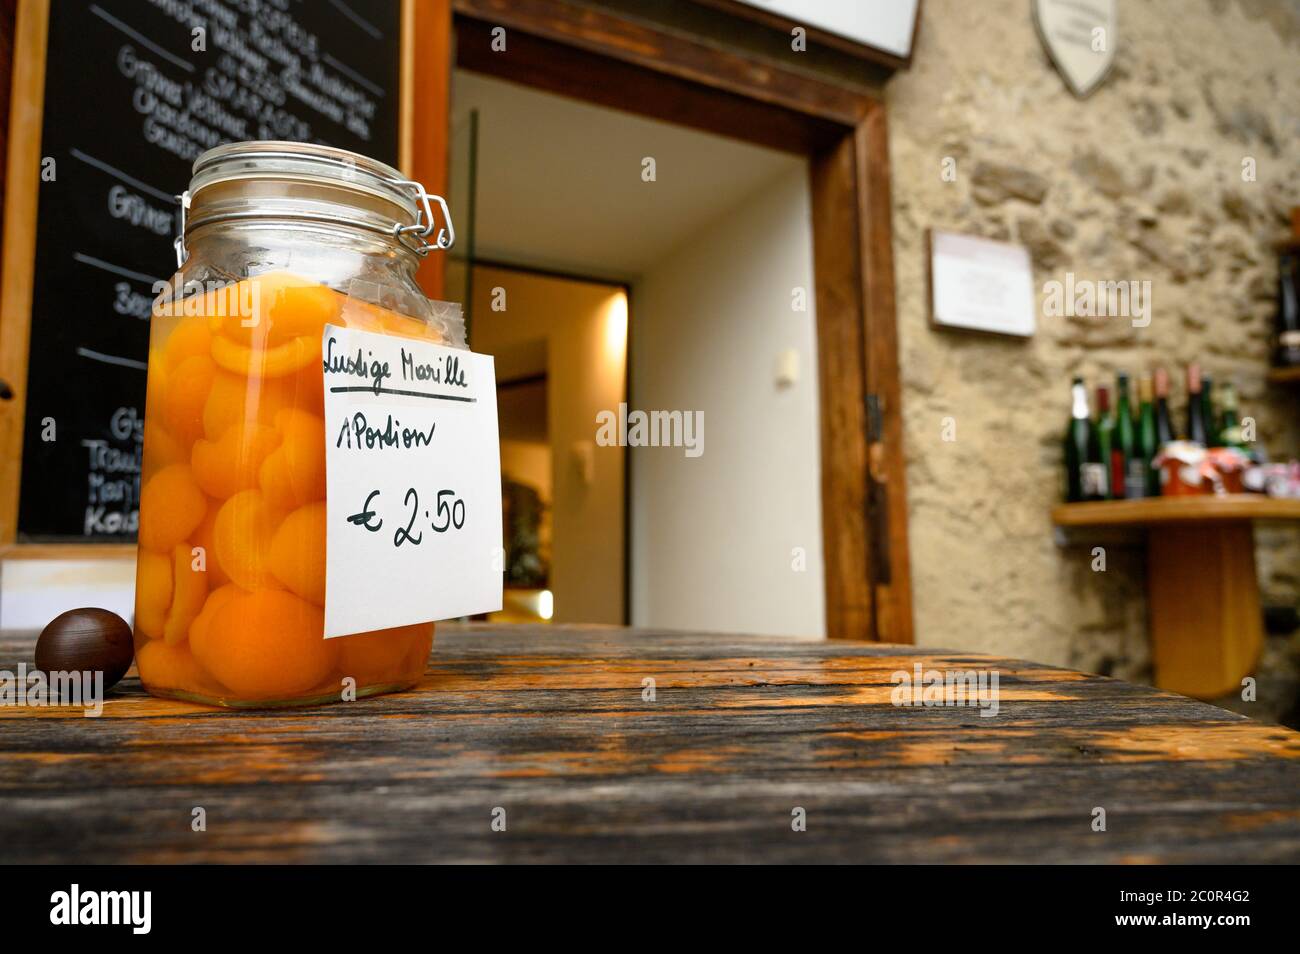 A jar of apricots sits outside a small shop in the town of Dürnstein in the Wachau Valley wine region of Austria Stock Photo